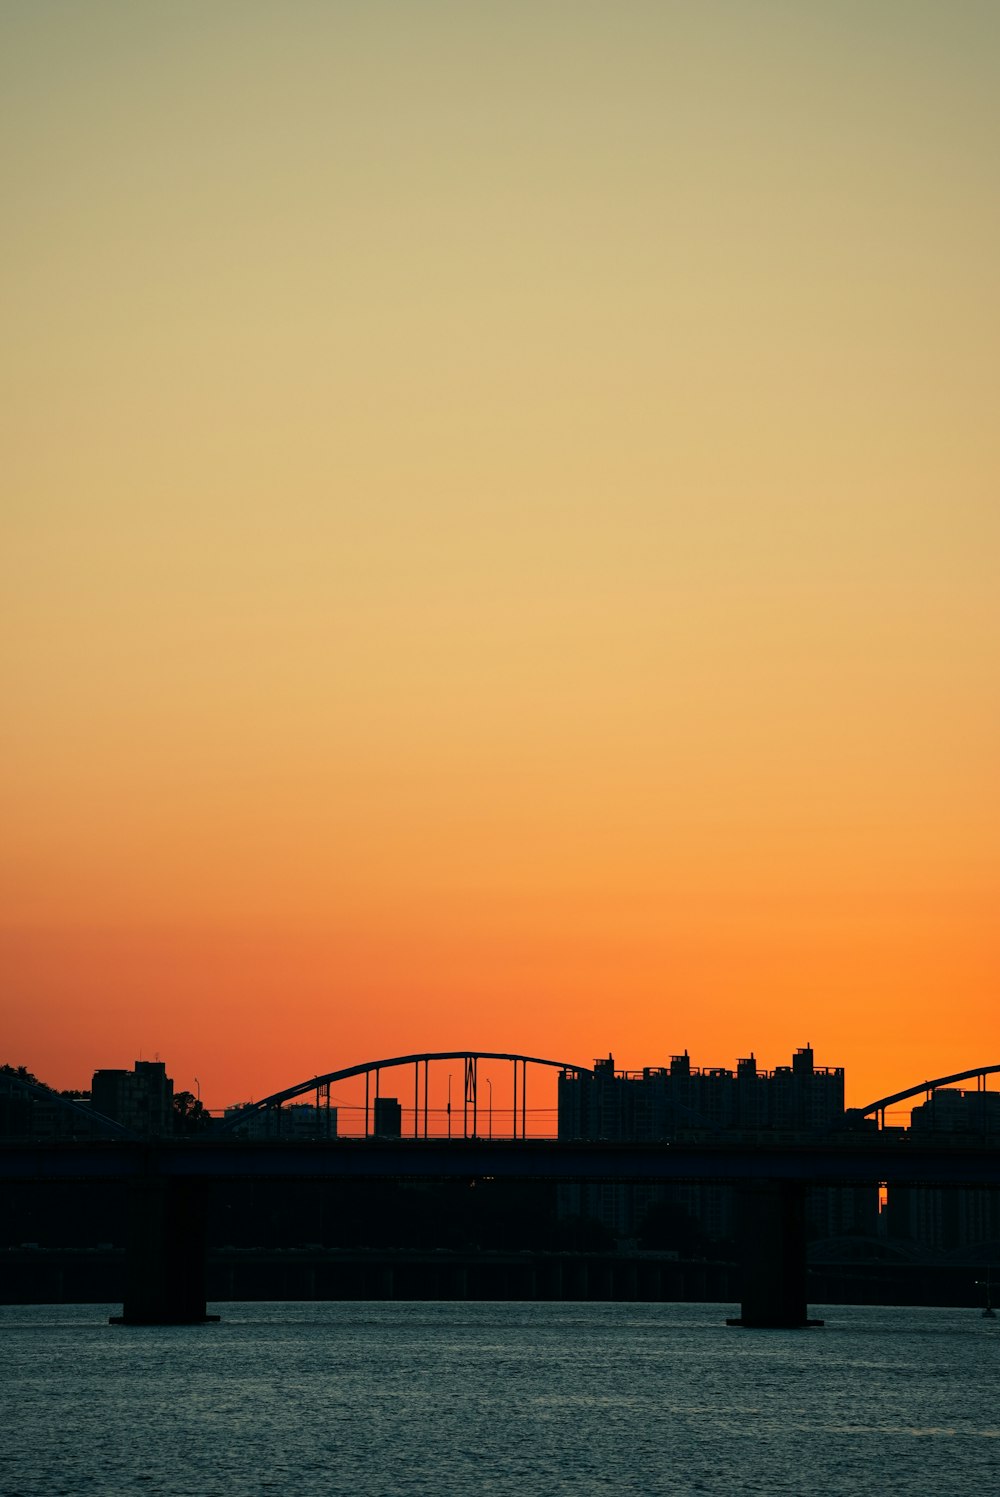 a plane flying over a bridge at sunset